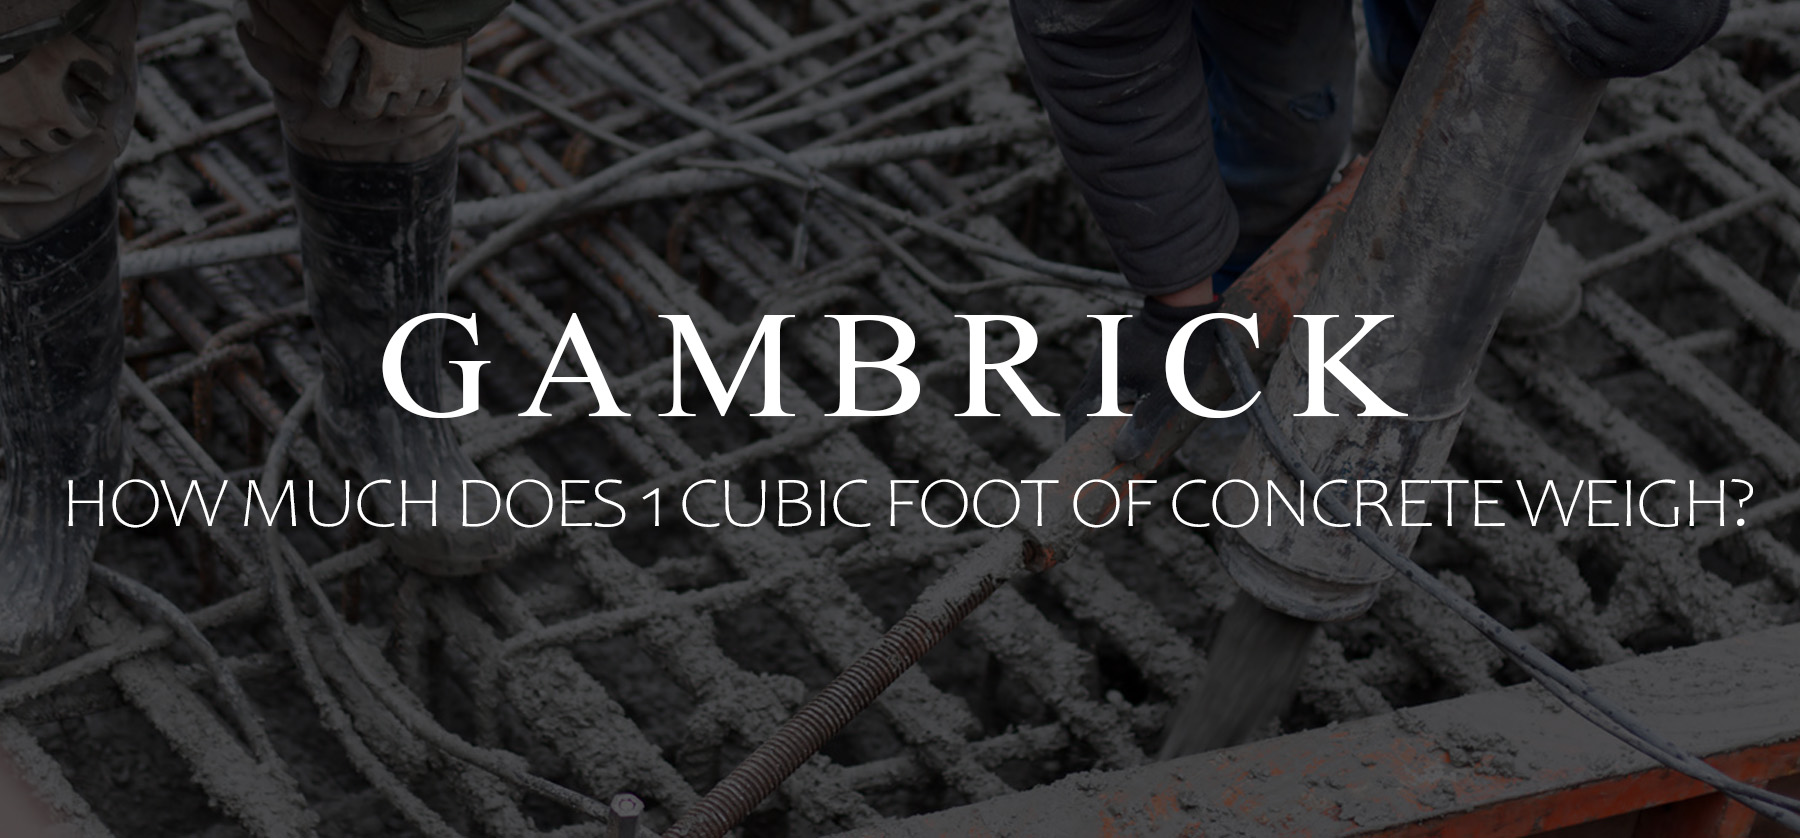 how much does 1 cubic foot of concrete weigh